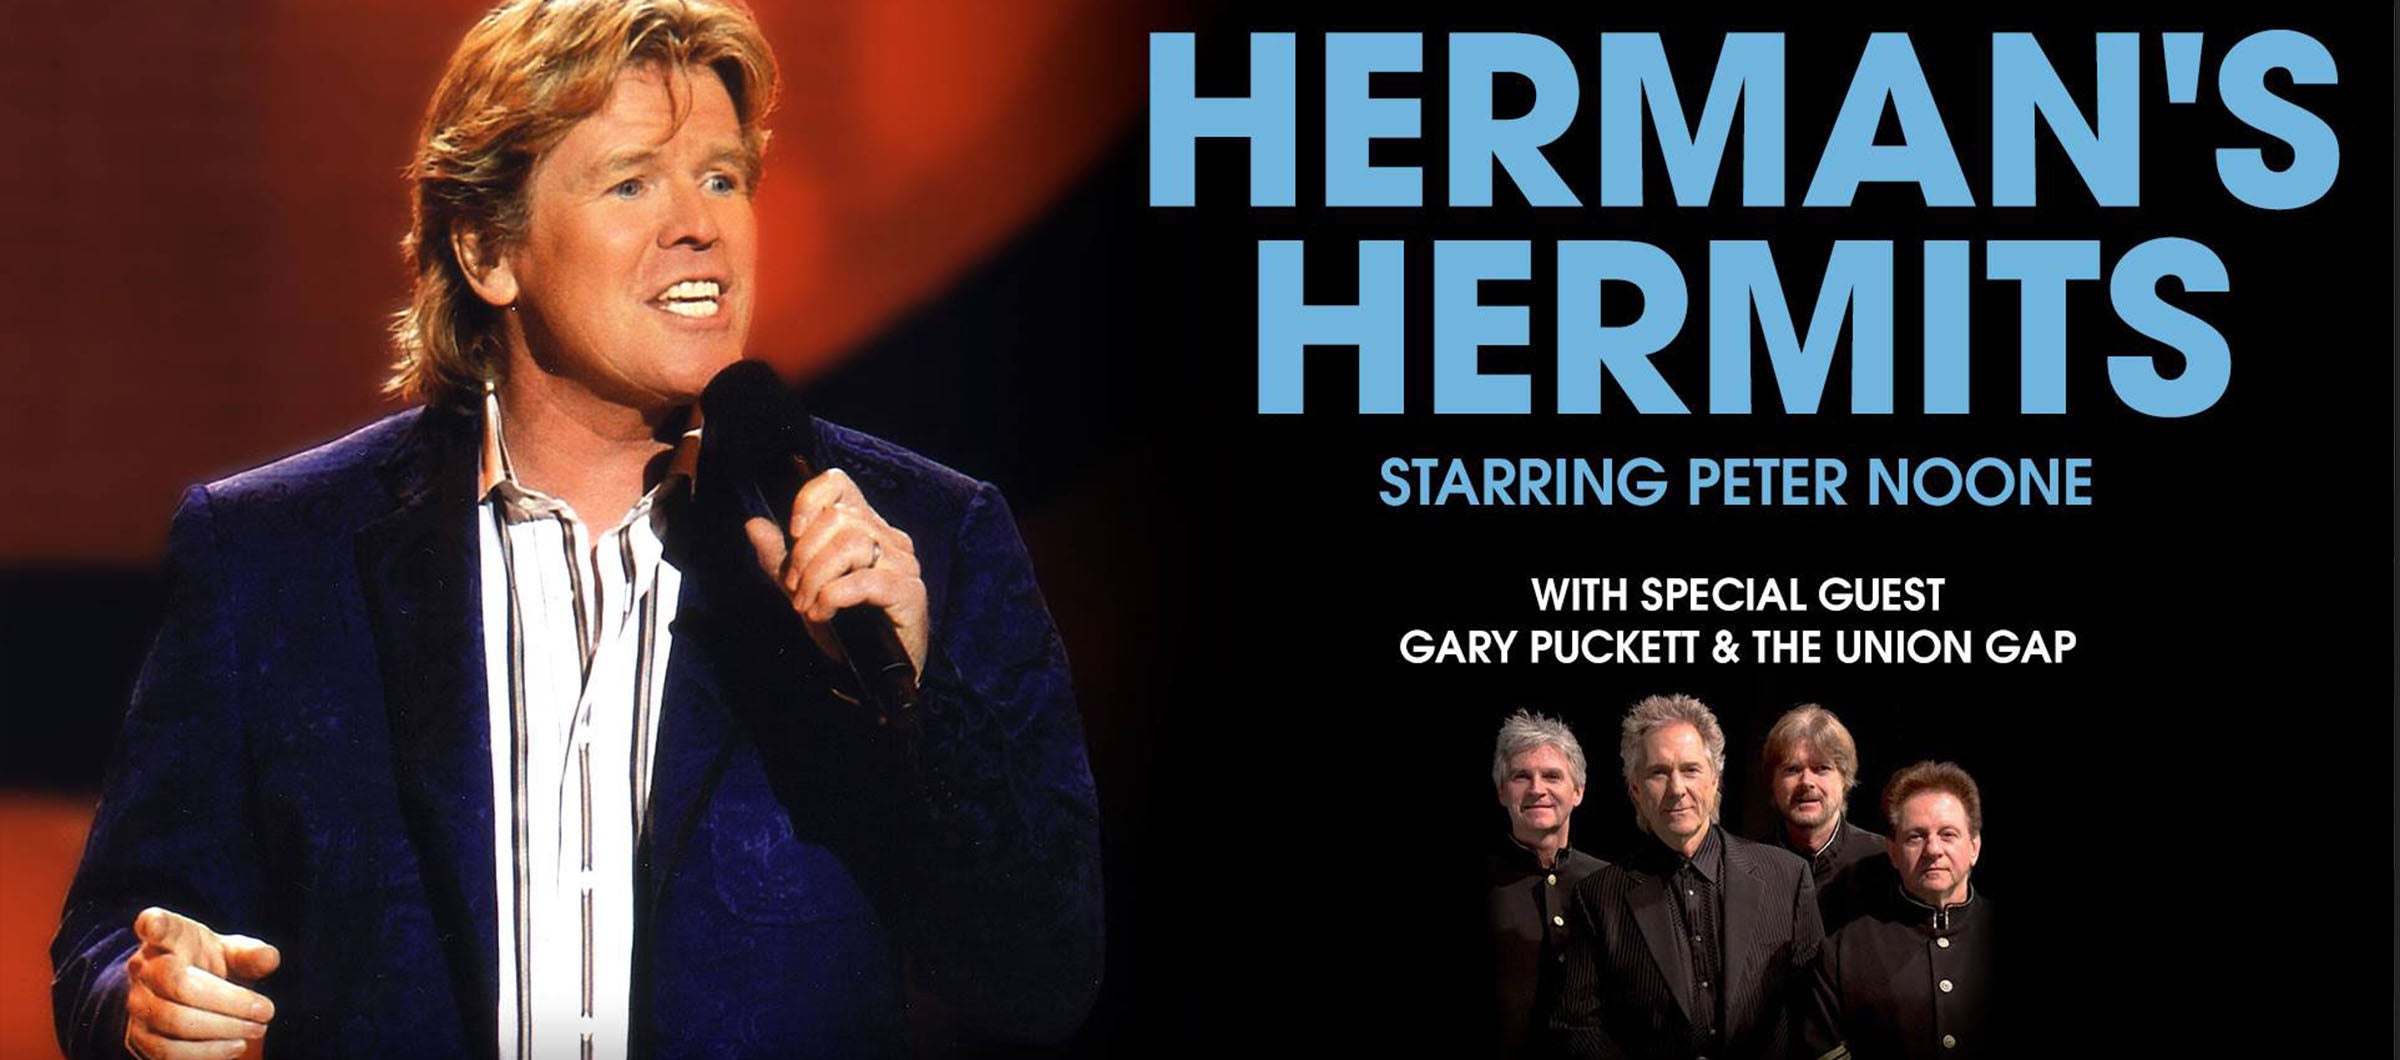 Herman's Hermits starring Peter Noone with Special Guest Gary Puckett & The Union Gap